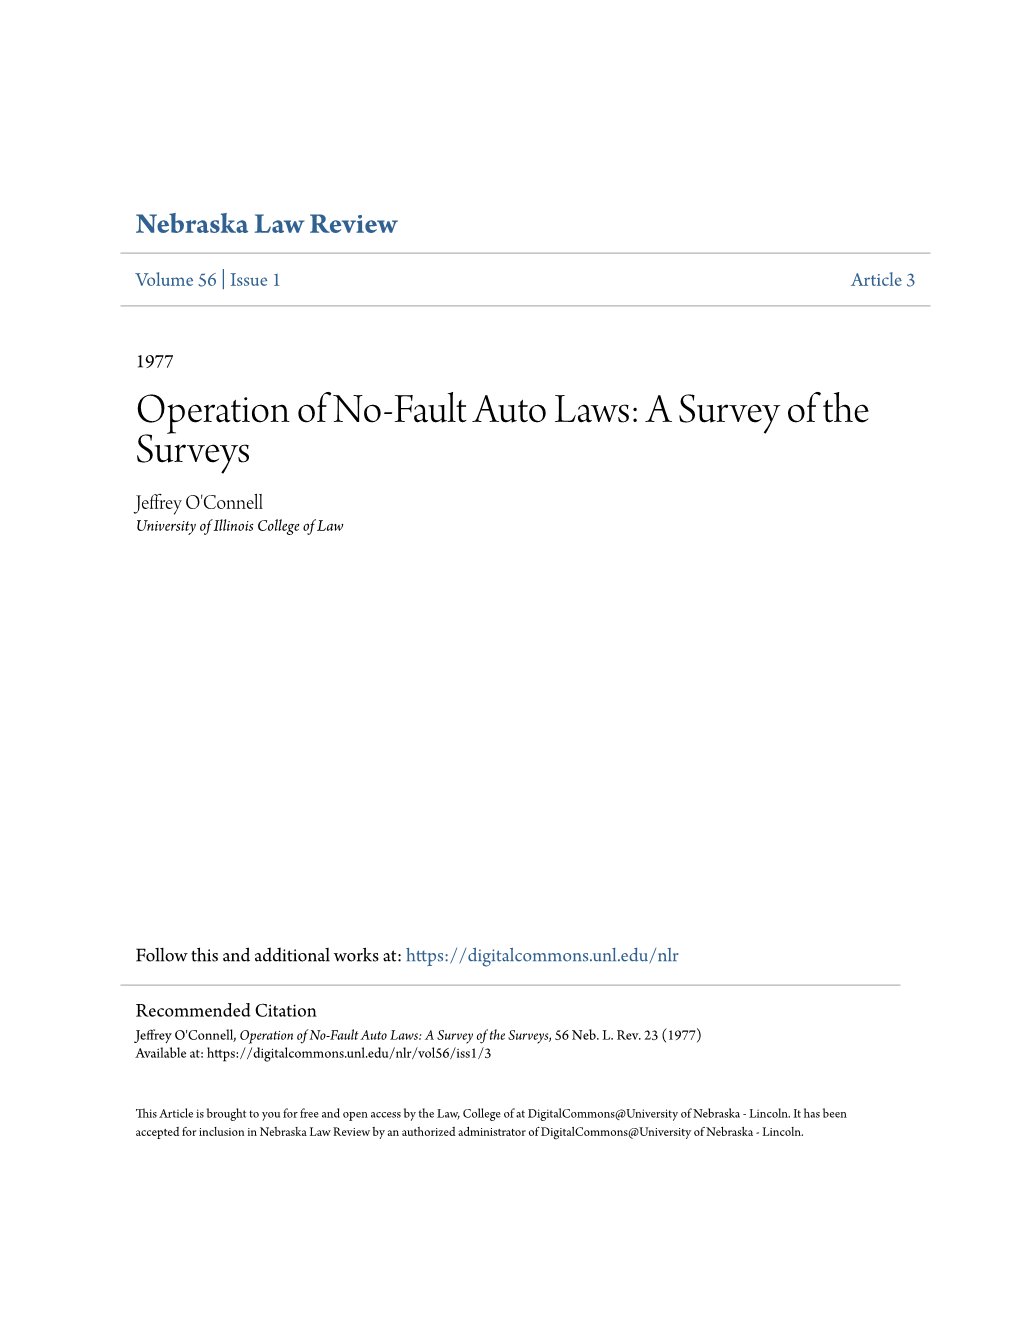 Operation of No-Fault Auto Laws: a Survey of the Surveys Jeffrey O'connell University of Illinois College of Law